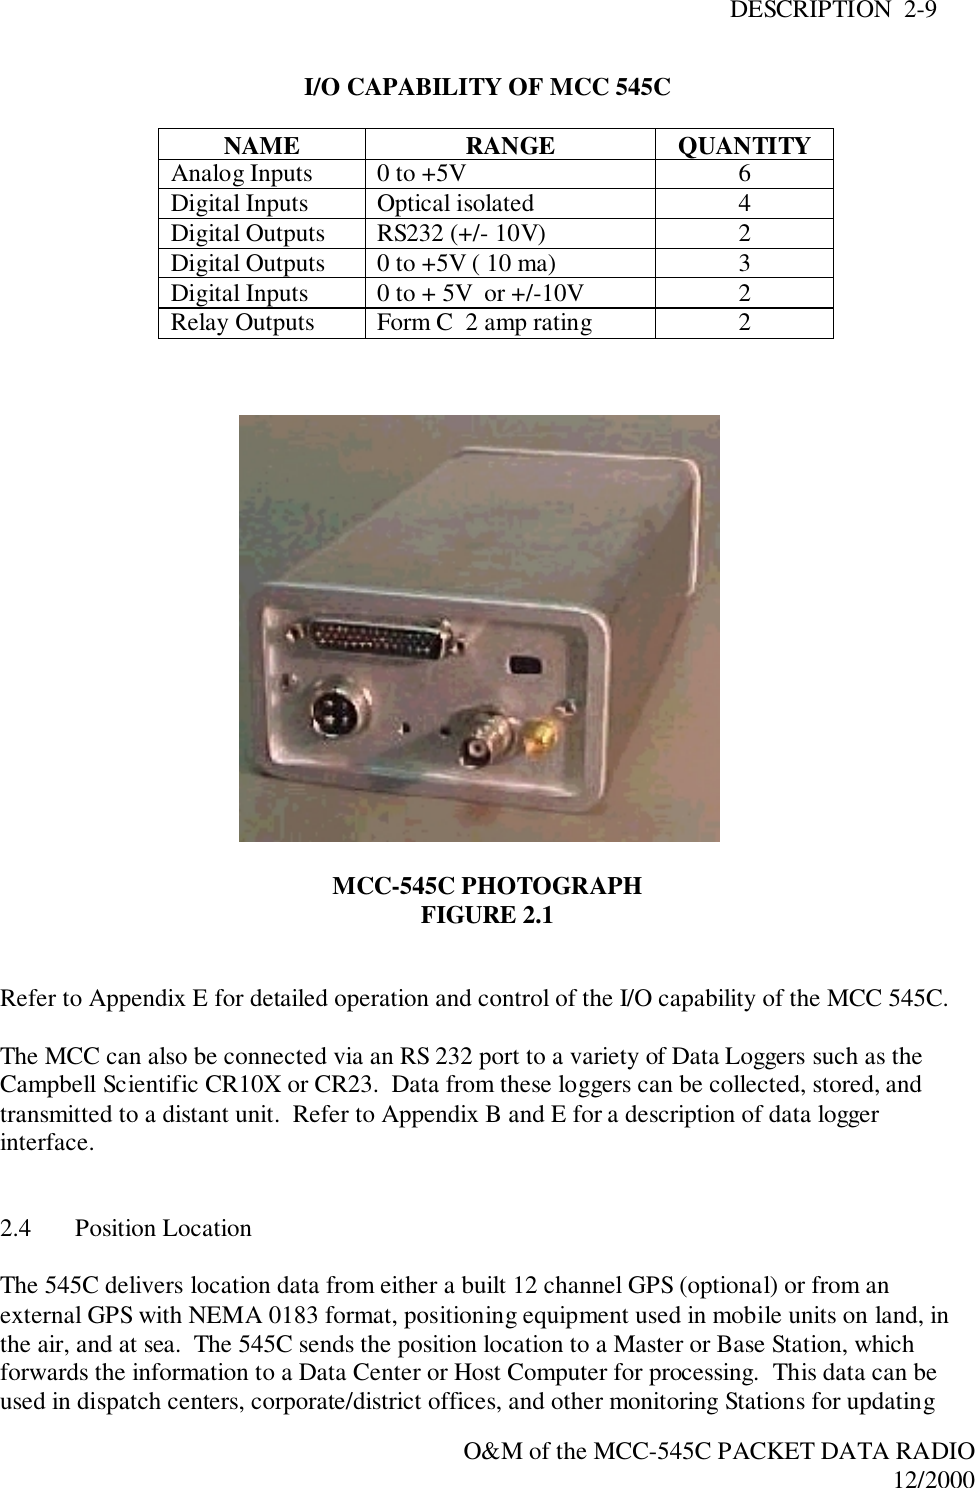 DESCRIPTION  2-9O&amp;M of the MCC-545C PACKET DATA RADIO12/2000I/O CAPABILITY OF MCC 545CNAME RANGE QUANTITYAnalog Inputs 0 to +5V 6Digital Inputs Optical isolated 4Digital Outputs RS232 (+/- 10V) 2Digital Outputs 0 to +5V ( 10 ma) 3Digital Inputs 0 to + 5V  or +/-10V 2Relay Outputs Form C  2 amp rating 2MCC-545C PHOTOGRAPHFIGURE 2.1Refer to Appendix E for detailed operation and control of the I/O capability of the MCC 545C.The MCC can also be connected via an RS 232 port to a variety of Data Loggers such as theCampbell Scientific CR10X or CR23.  Data from these loggers can be collected, stored, andtransmitted to a distant unit.  Refer to Appendix B and E for a description of data loggerinterface.2.4 Position LocationThe 545C delivers location data from either a built 12 channel GPS (optional) or from anexternal GPS with NEMA 0183 format, positioning equipment used in mobile units on land, inthe air, and at sea.  The 545C sends the position location to a Master or Base Station, whichforwards the information to a Data Center or Host Computer for processing.  This data can beused in dispatch centers, corporate/district offices, and other monitoring Stations for updating